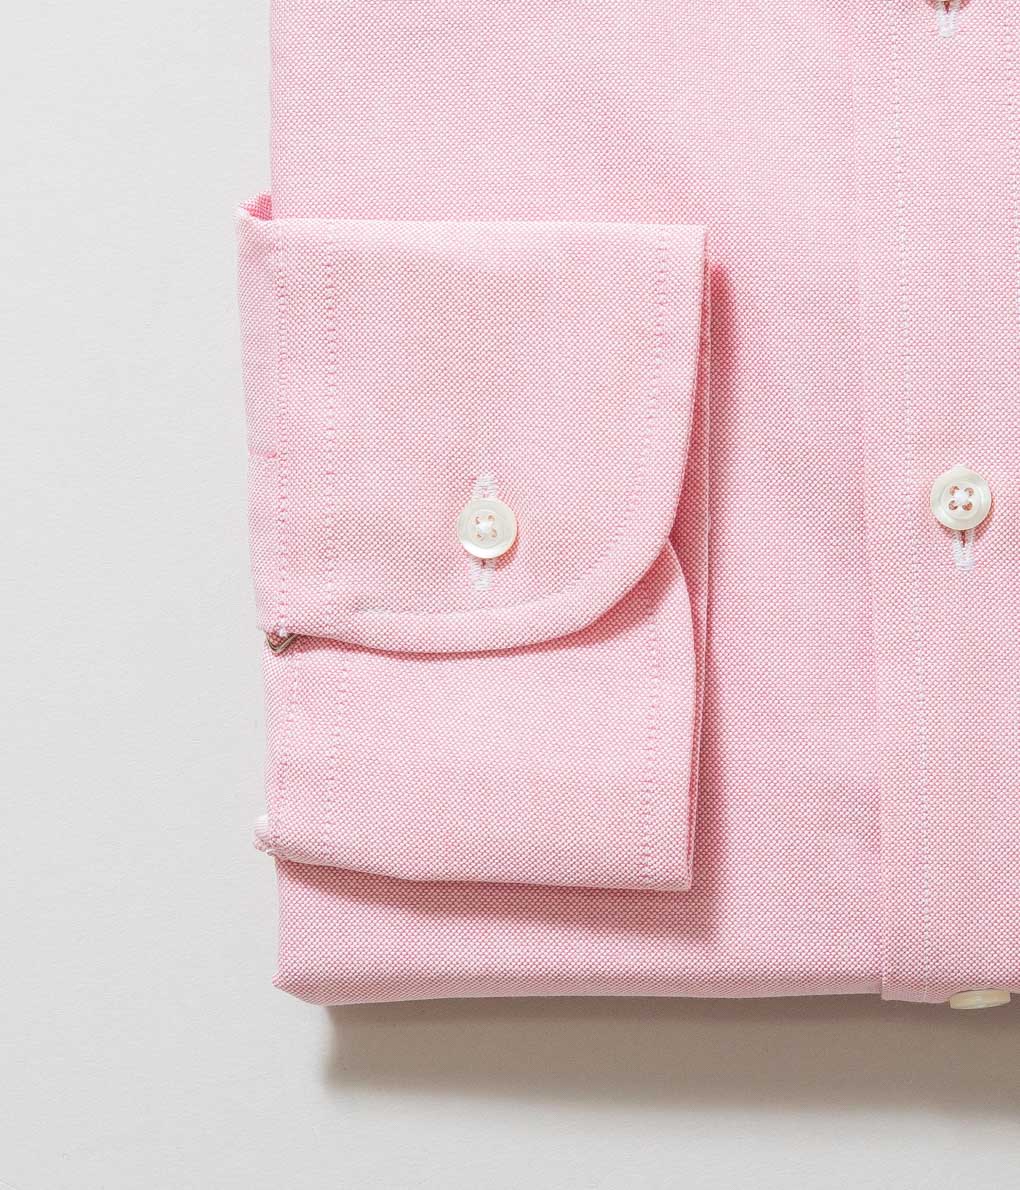 INDIVIDUALIZED SHIRTS "CAMBRIDGE OXFORD (CLASSIC FIT BUTTON DOWN SHIRT)(PINK)"